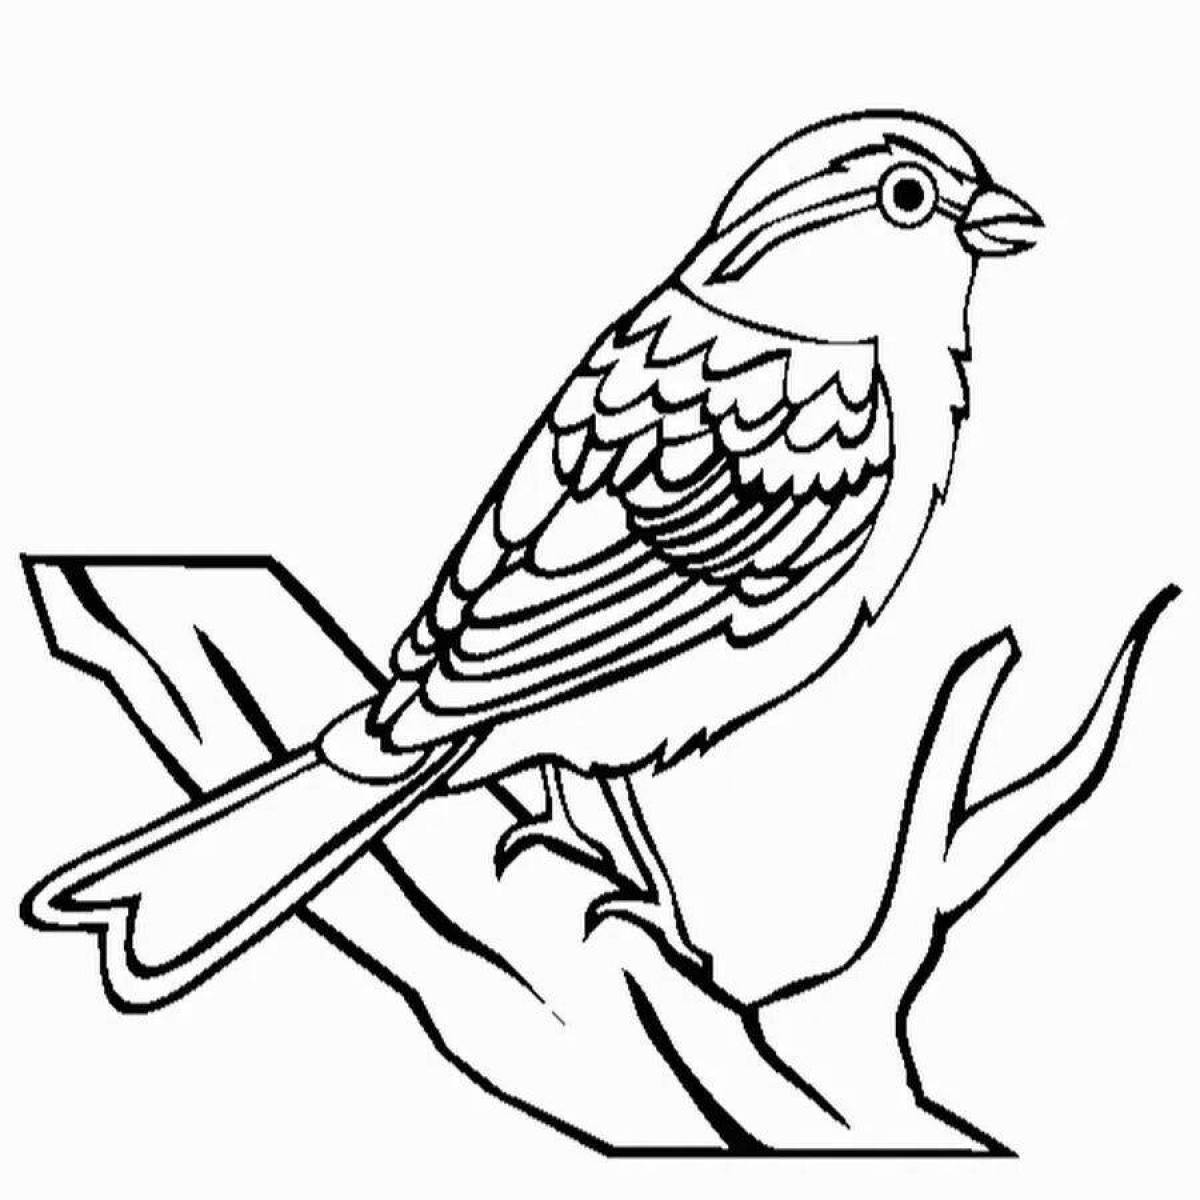 Coloring book excited sparrow for 4-5 year olds